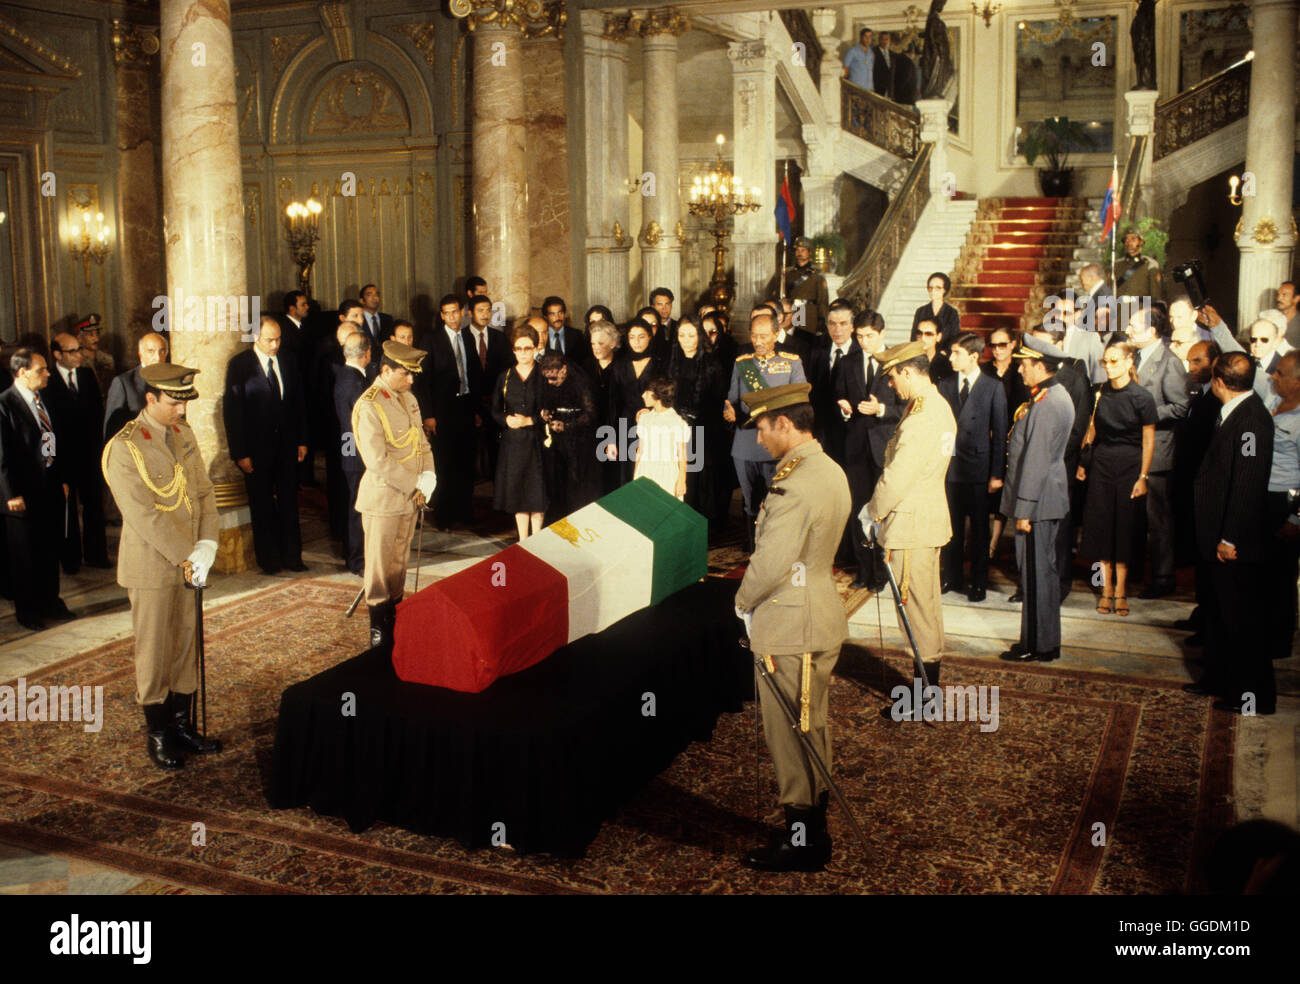 Shah of Iran his state funeral Cairo Egypt. Mohammad Reza Pahlavi, also known as Mohammad Reza Shah. The Shah's  widow and family and President Sadat 1980. The Lying in State at the Abdin Palace. HOMER SYKES Stock Photo